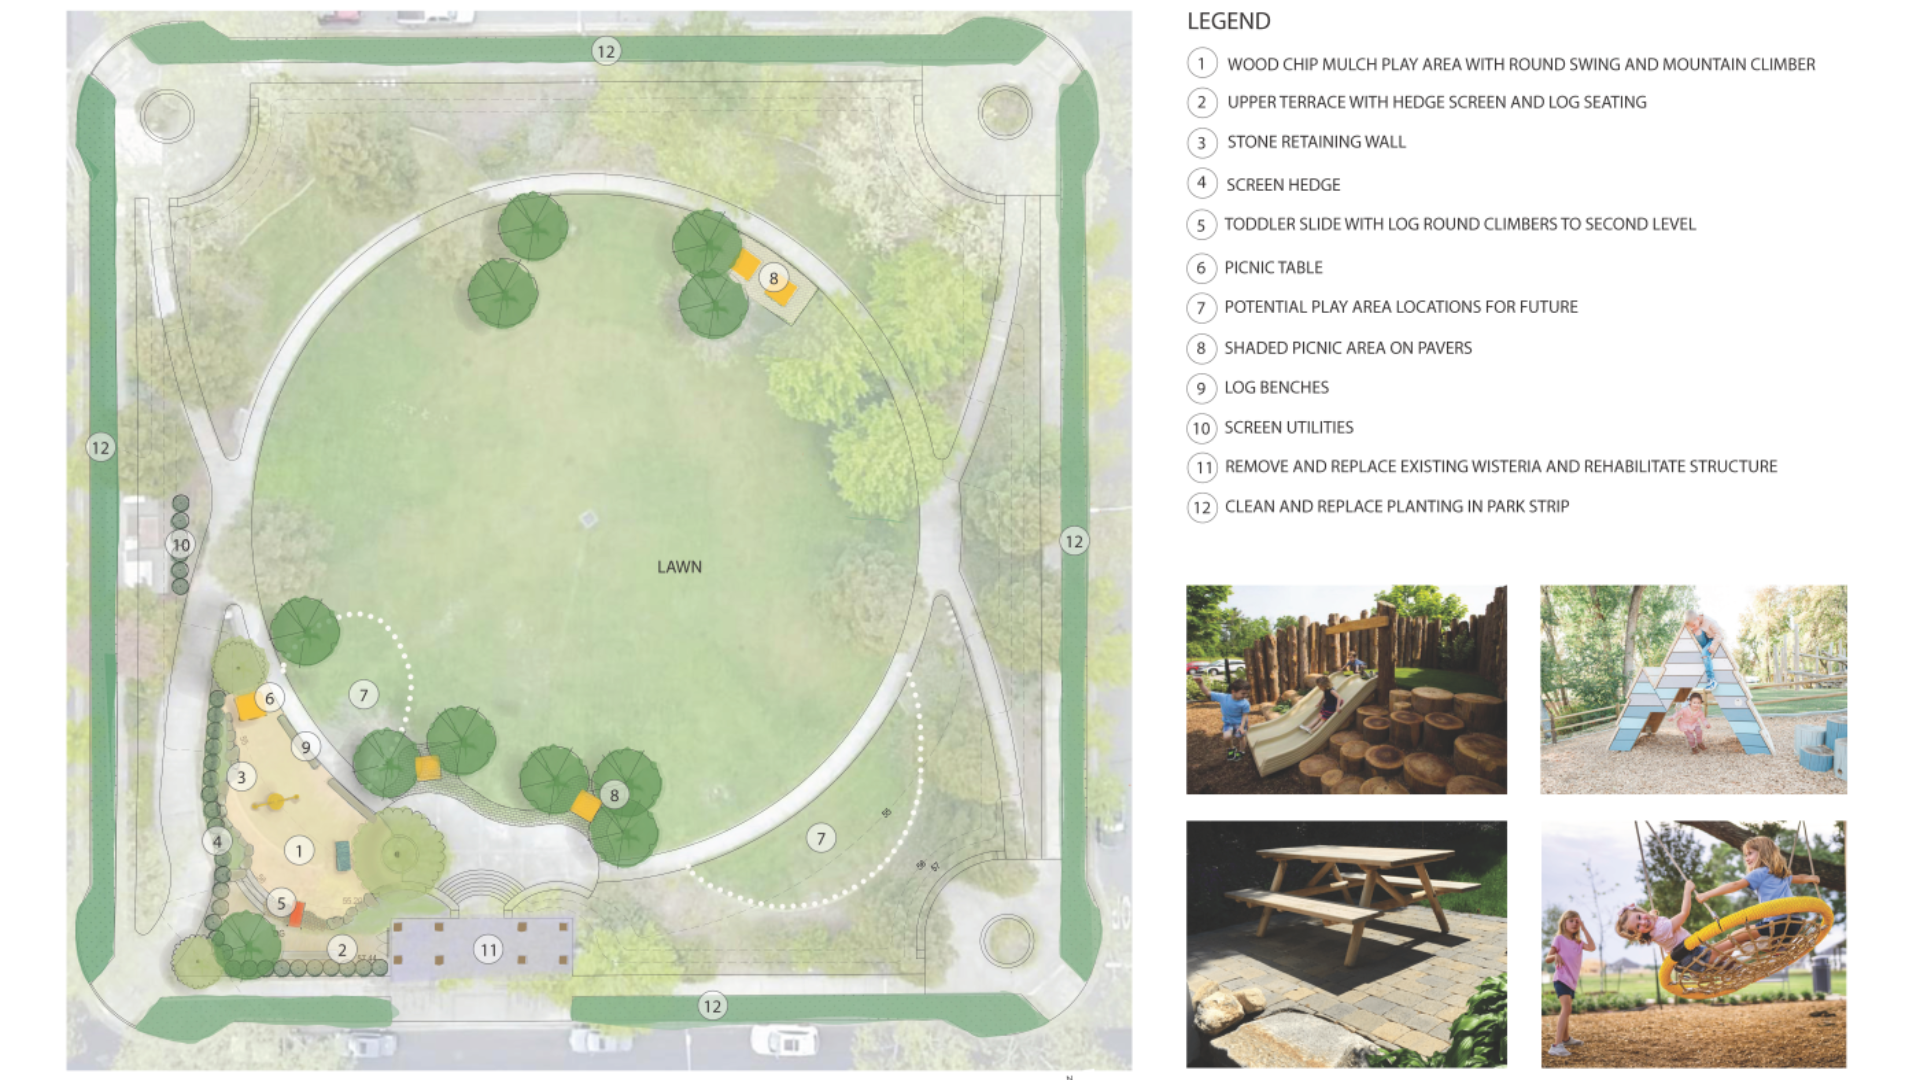 An illustration of an overhead view of a park showing proposed enhancements.